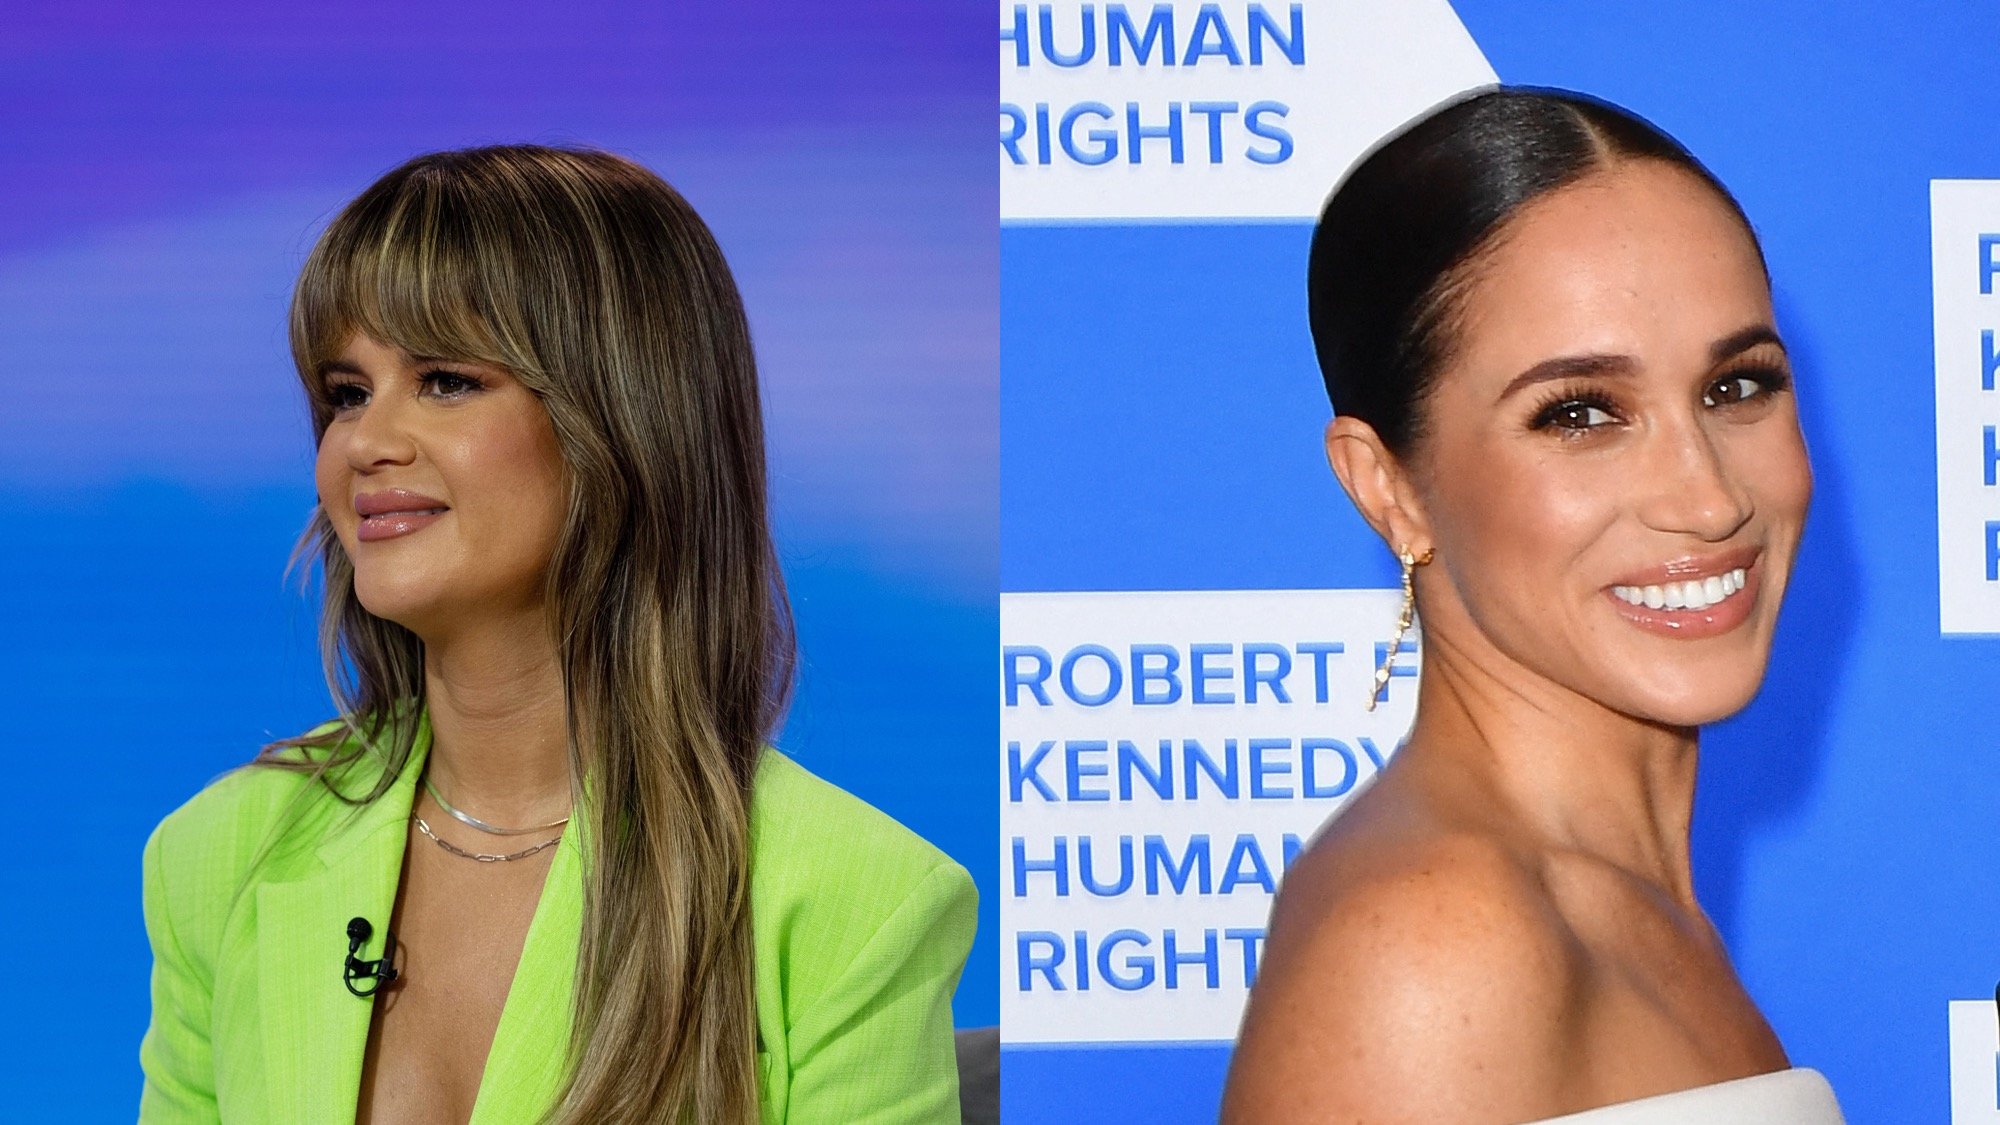 (L) Maren Morris on 'TODAY' on July 28, 2022. (R) Meghan Markle, Duchess of Sussex, arrives at the 2022 Robert F. Kennedy Human Rights Ripple of Hope Award Gala at the Hilton Midtown in New York on December 6, 2022.